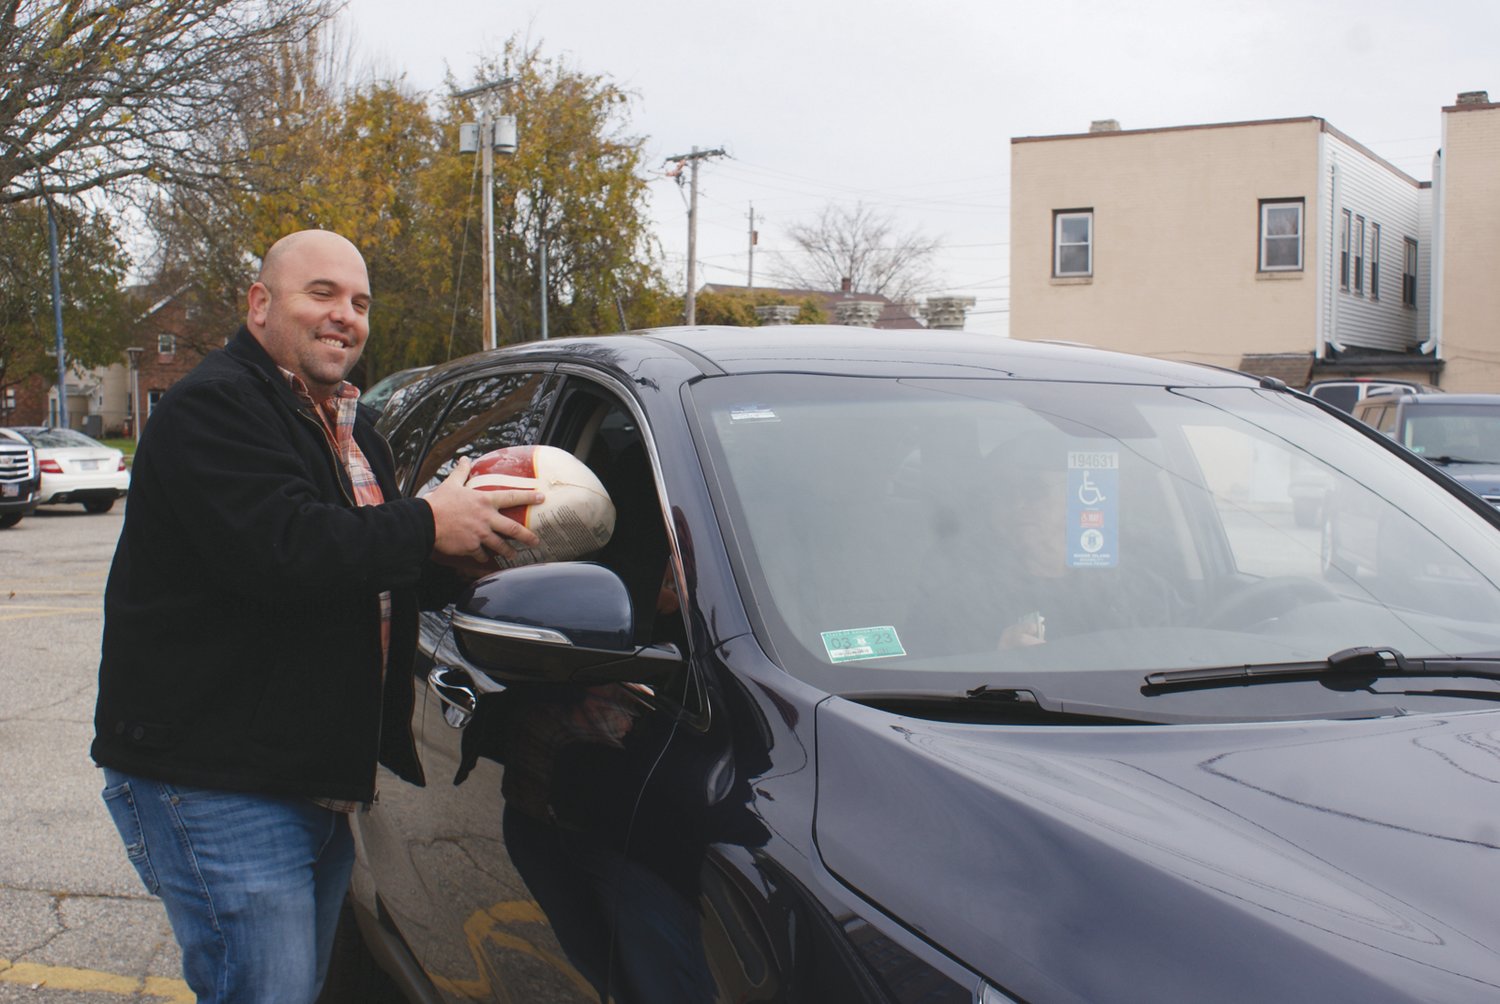 WITH SERVICE: Matthew Volpi, President of the St. Mary’s Feast Society, hand delivers a free frozen turkey to a family in need this holiday season.